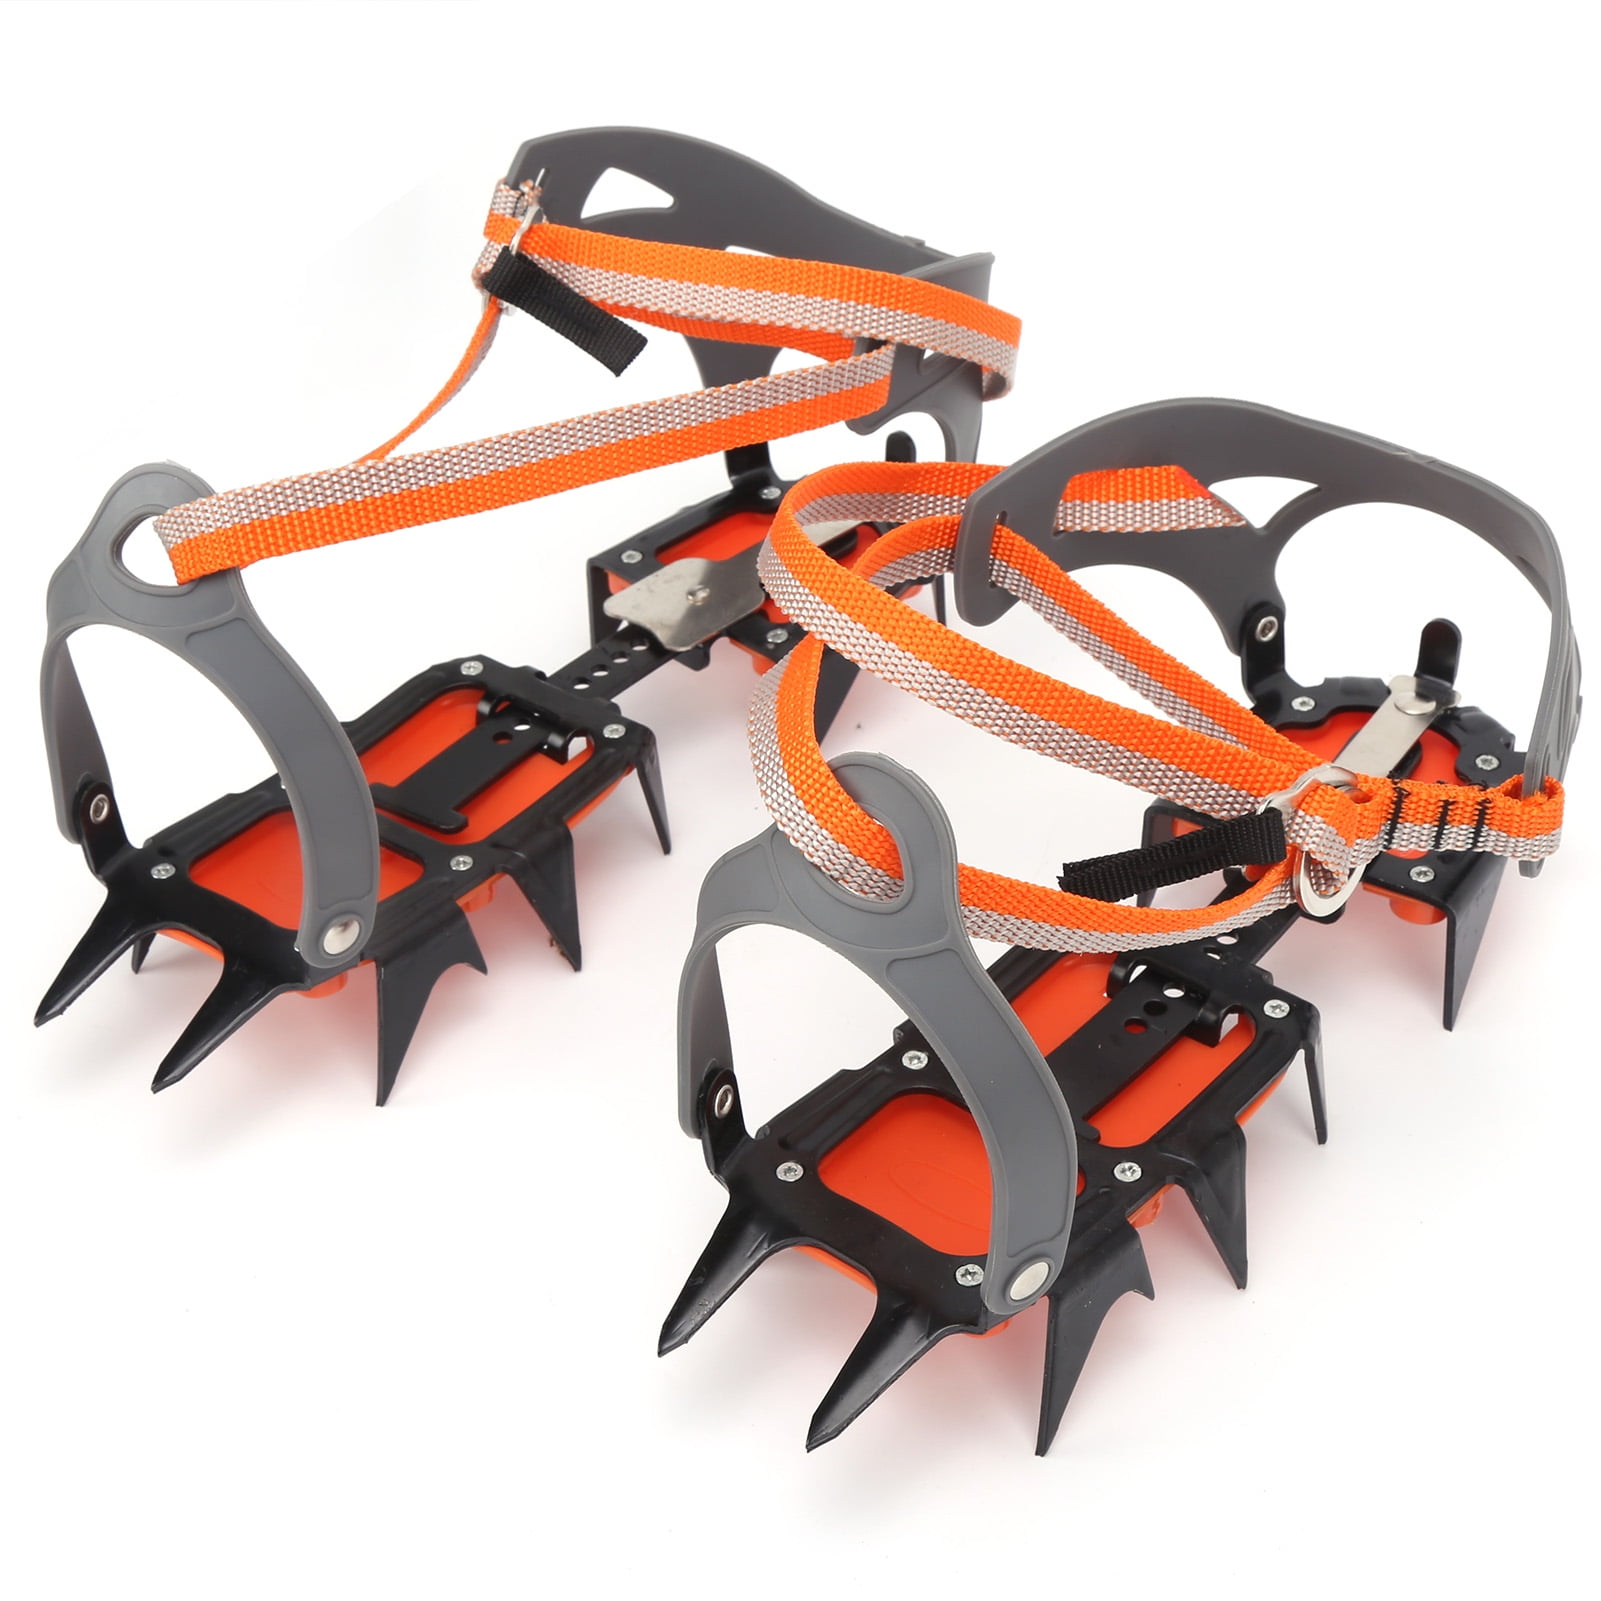 14-point Manganese Steel Climbing Gear Crampons Ice Grippers Crampon I6C7